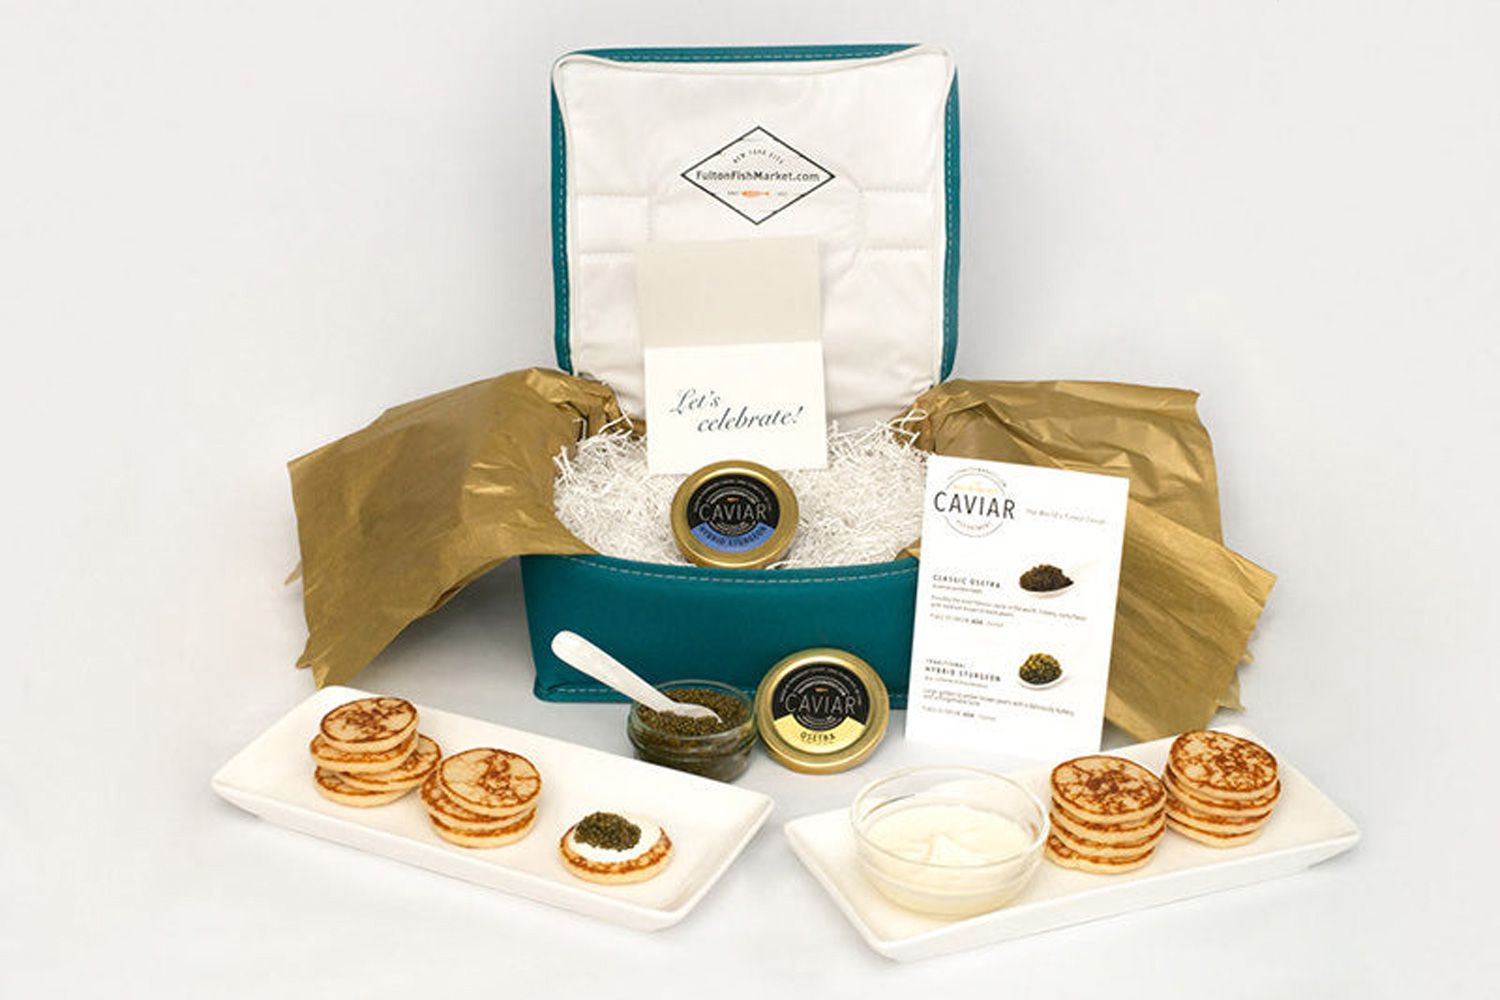 Fulton Fish Market Imported Caviar Assortment Package